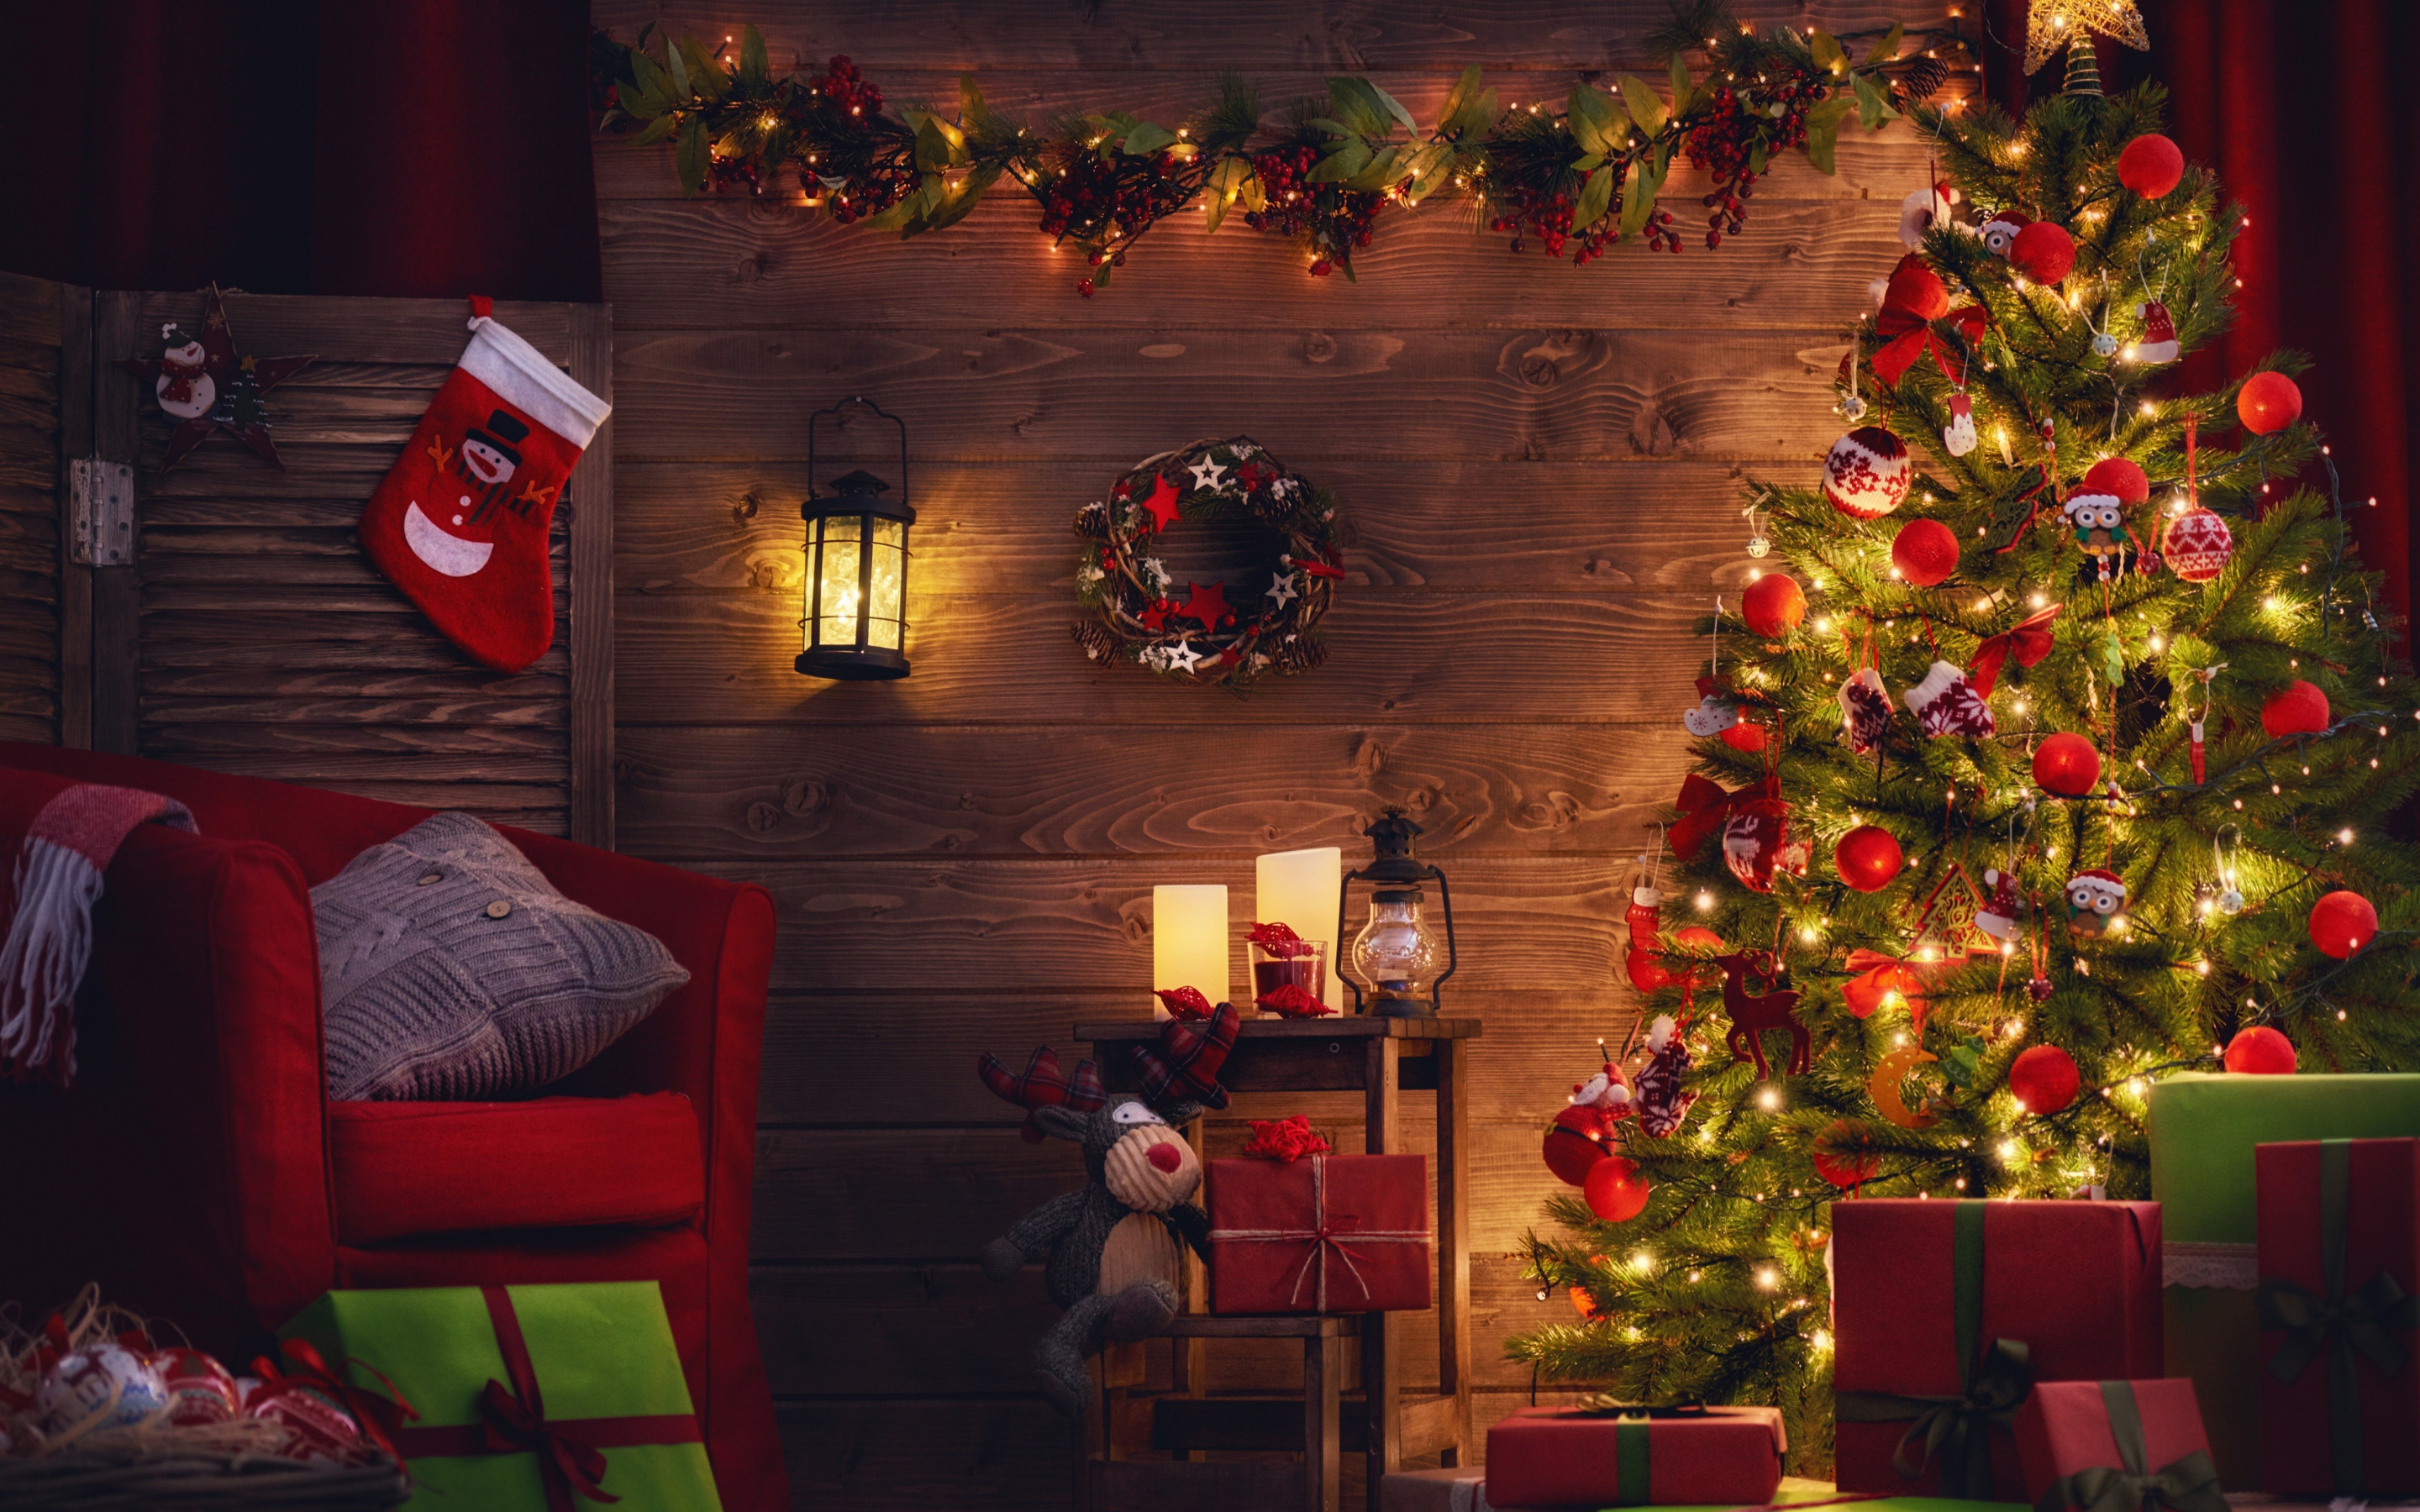 Christmas tree, holiday, decorations, gifts, 2880x1800 wallpaper